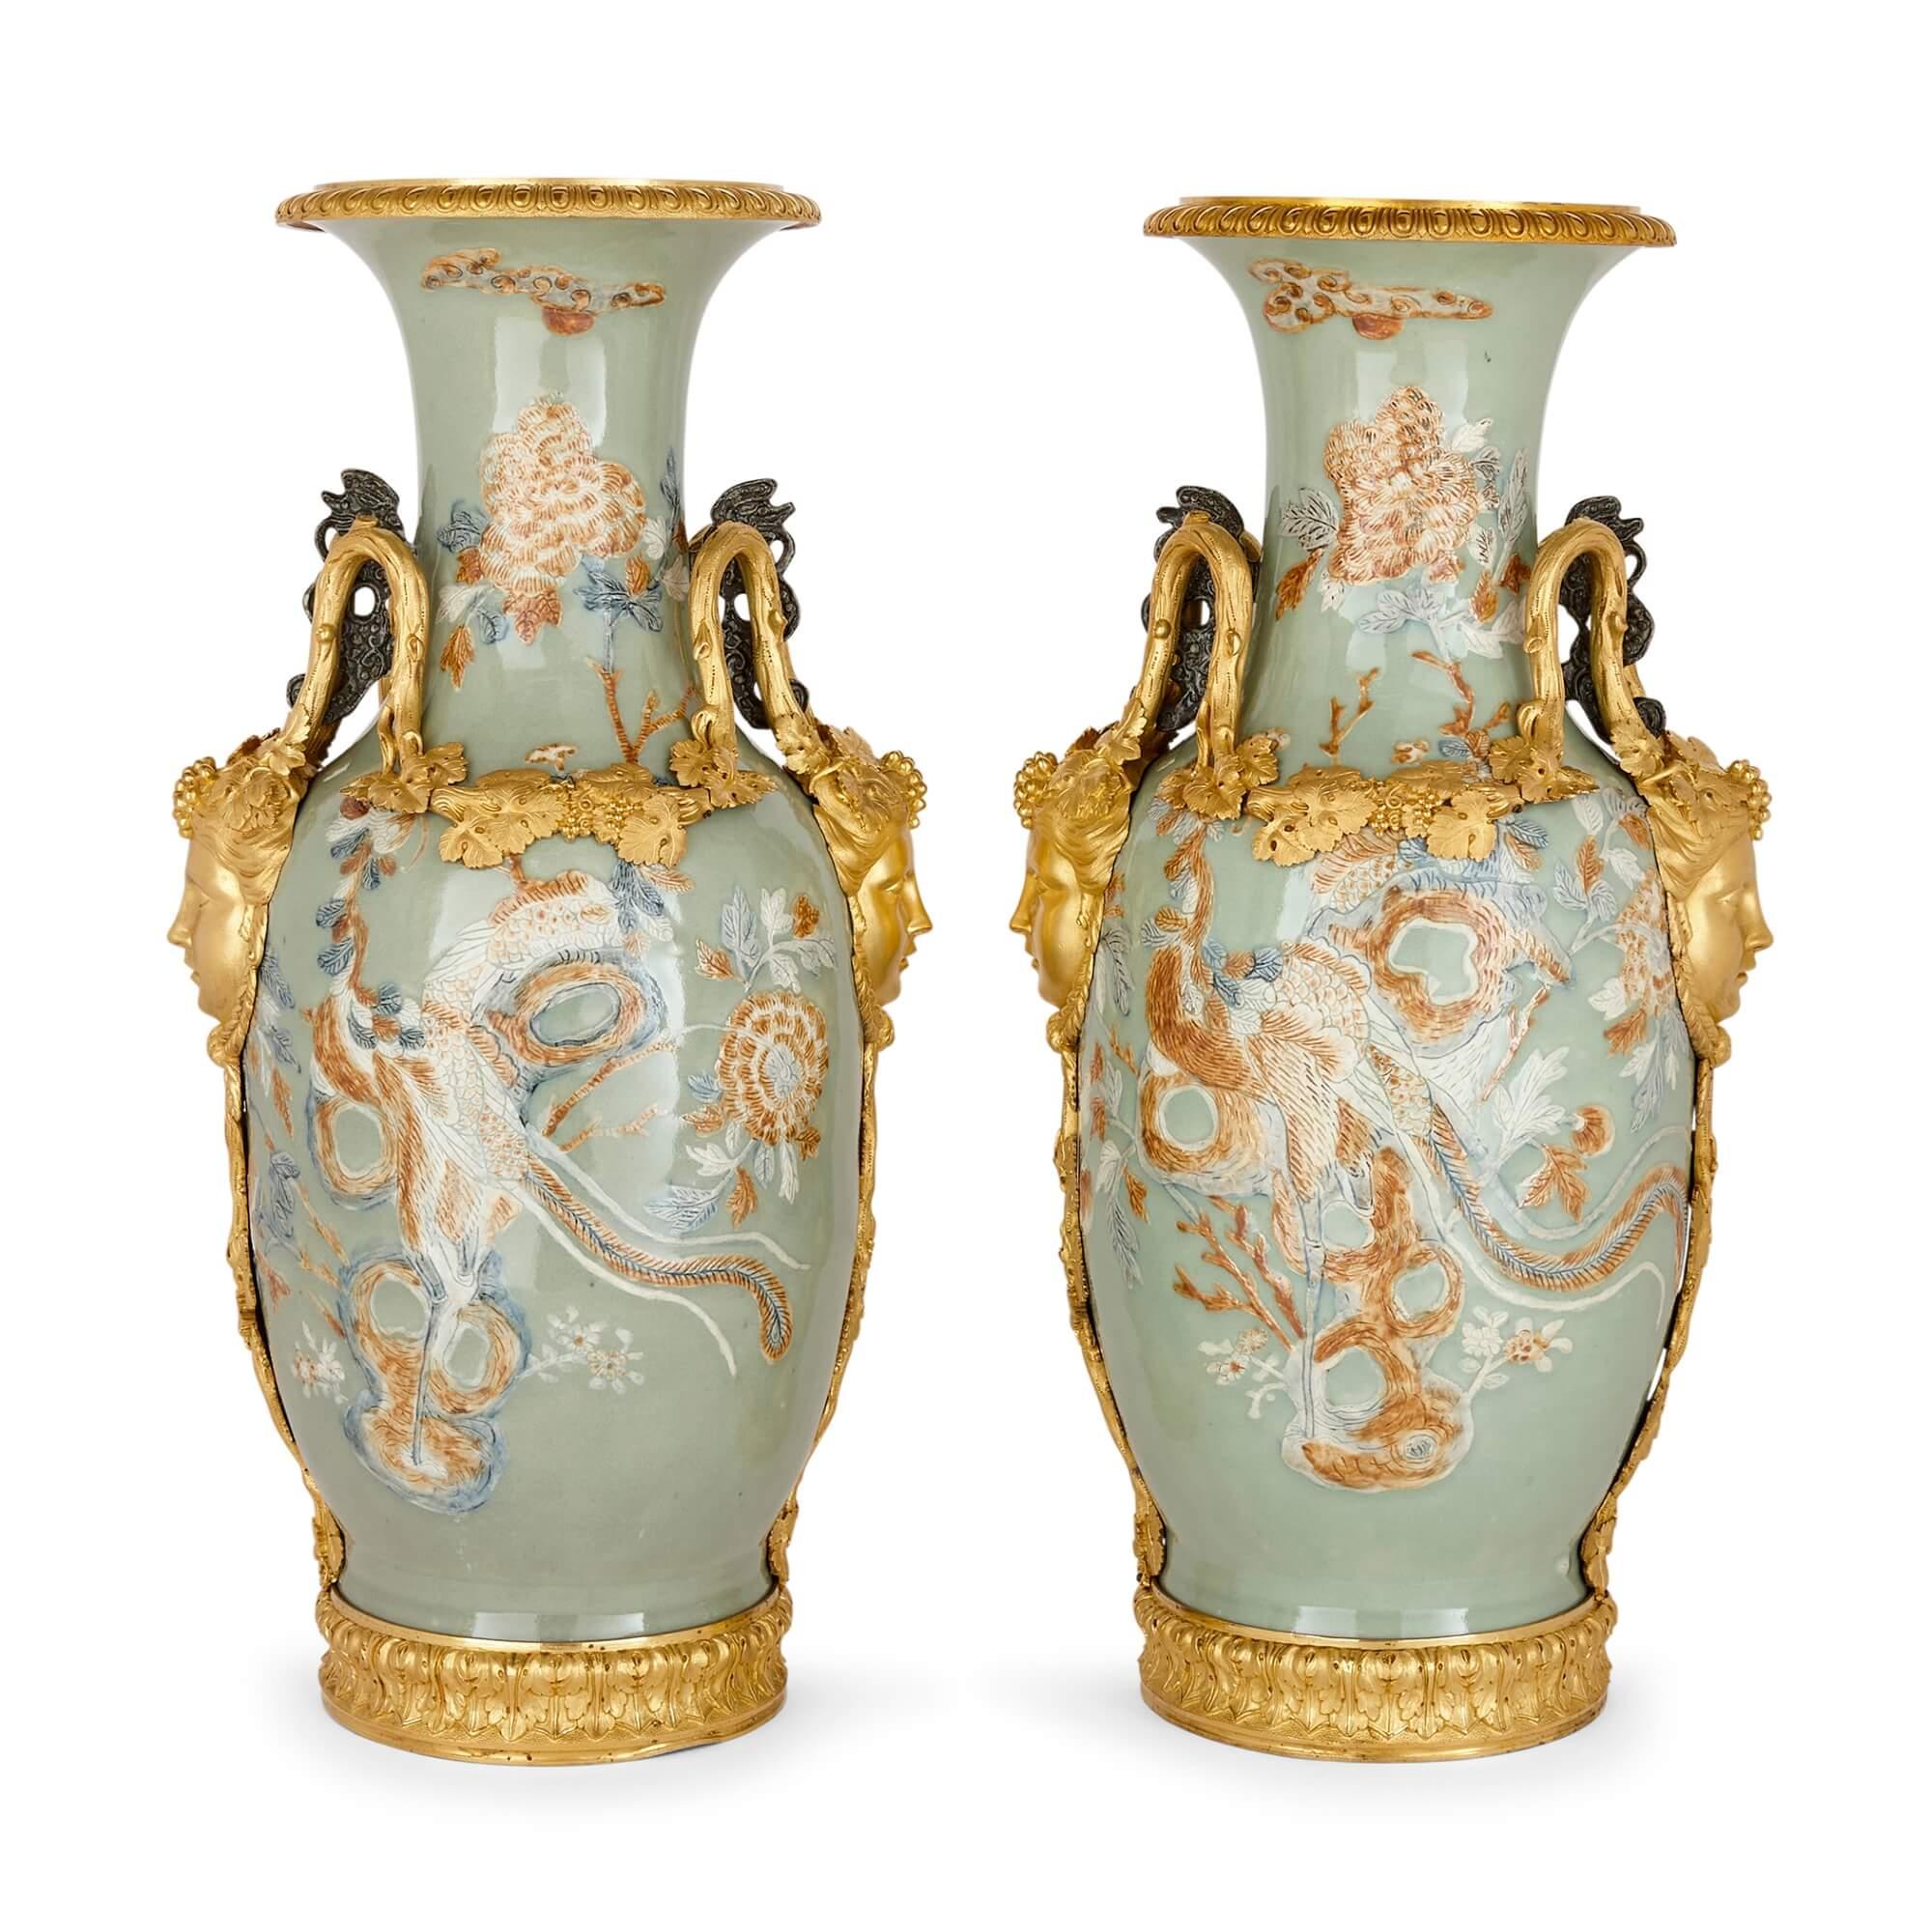 Pair of large Chinese porcelain vases with French ormolu mounts
French, Chinese, c.1840
Height 65.5cm, width 32cm, depth 25cm 

In the 1840s, two masterful art forms converged to birth this exquisite pair of vases, hewn from celadon porcelain,